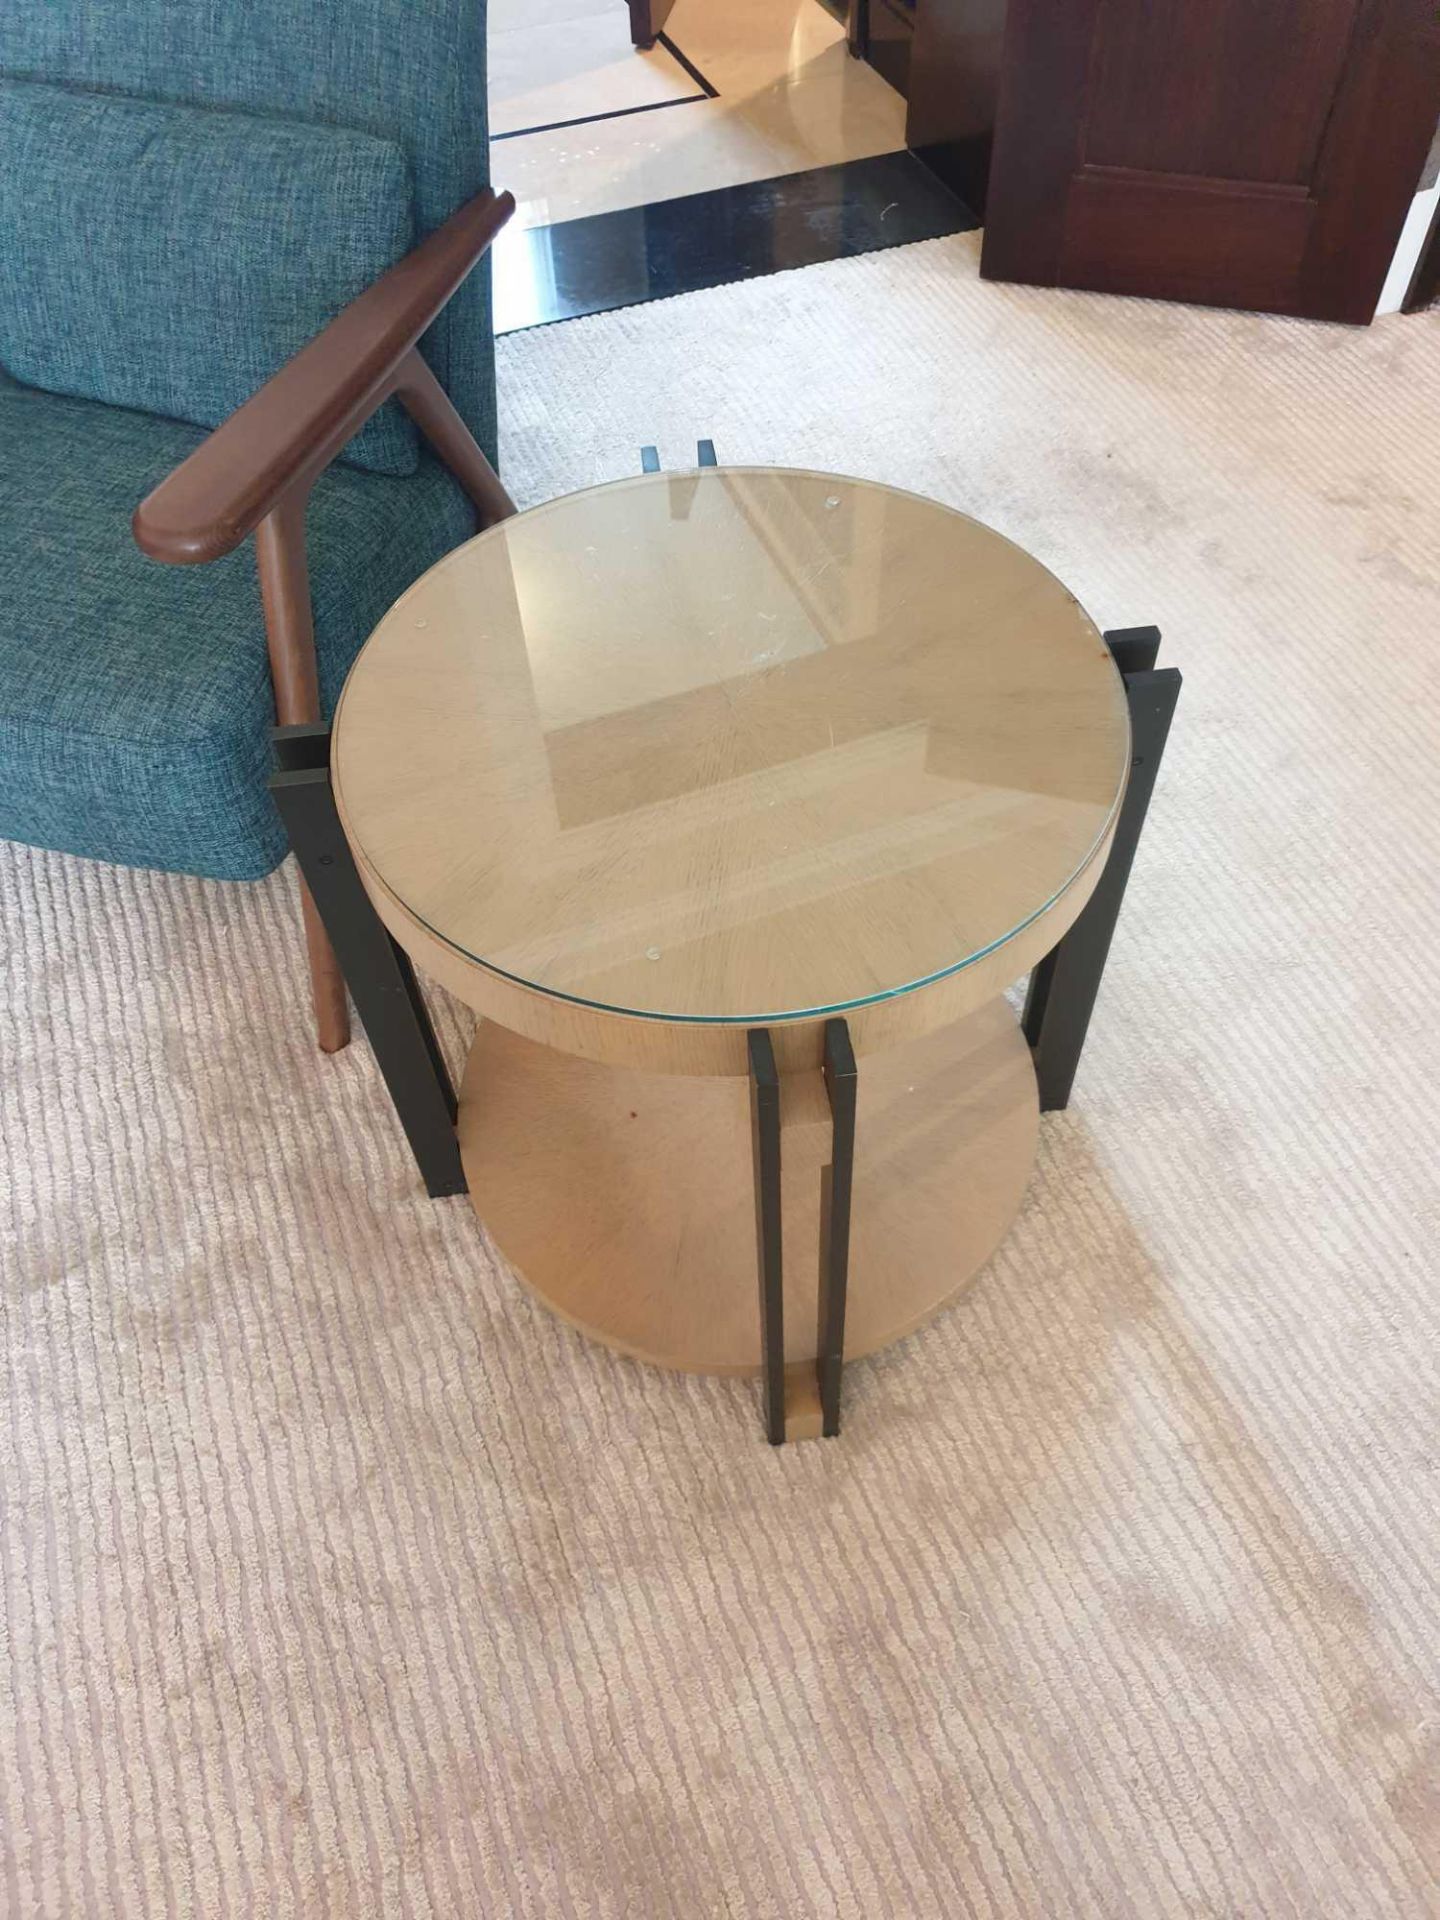 A Contemporary Side Table With Glass Top 61 x 57cm - Image 2 of 6